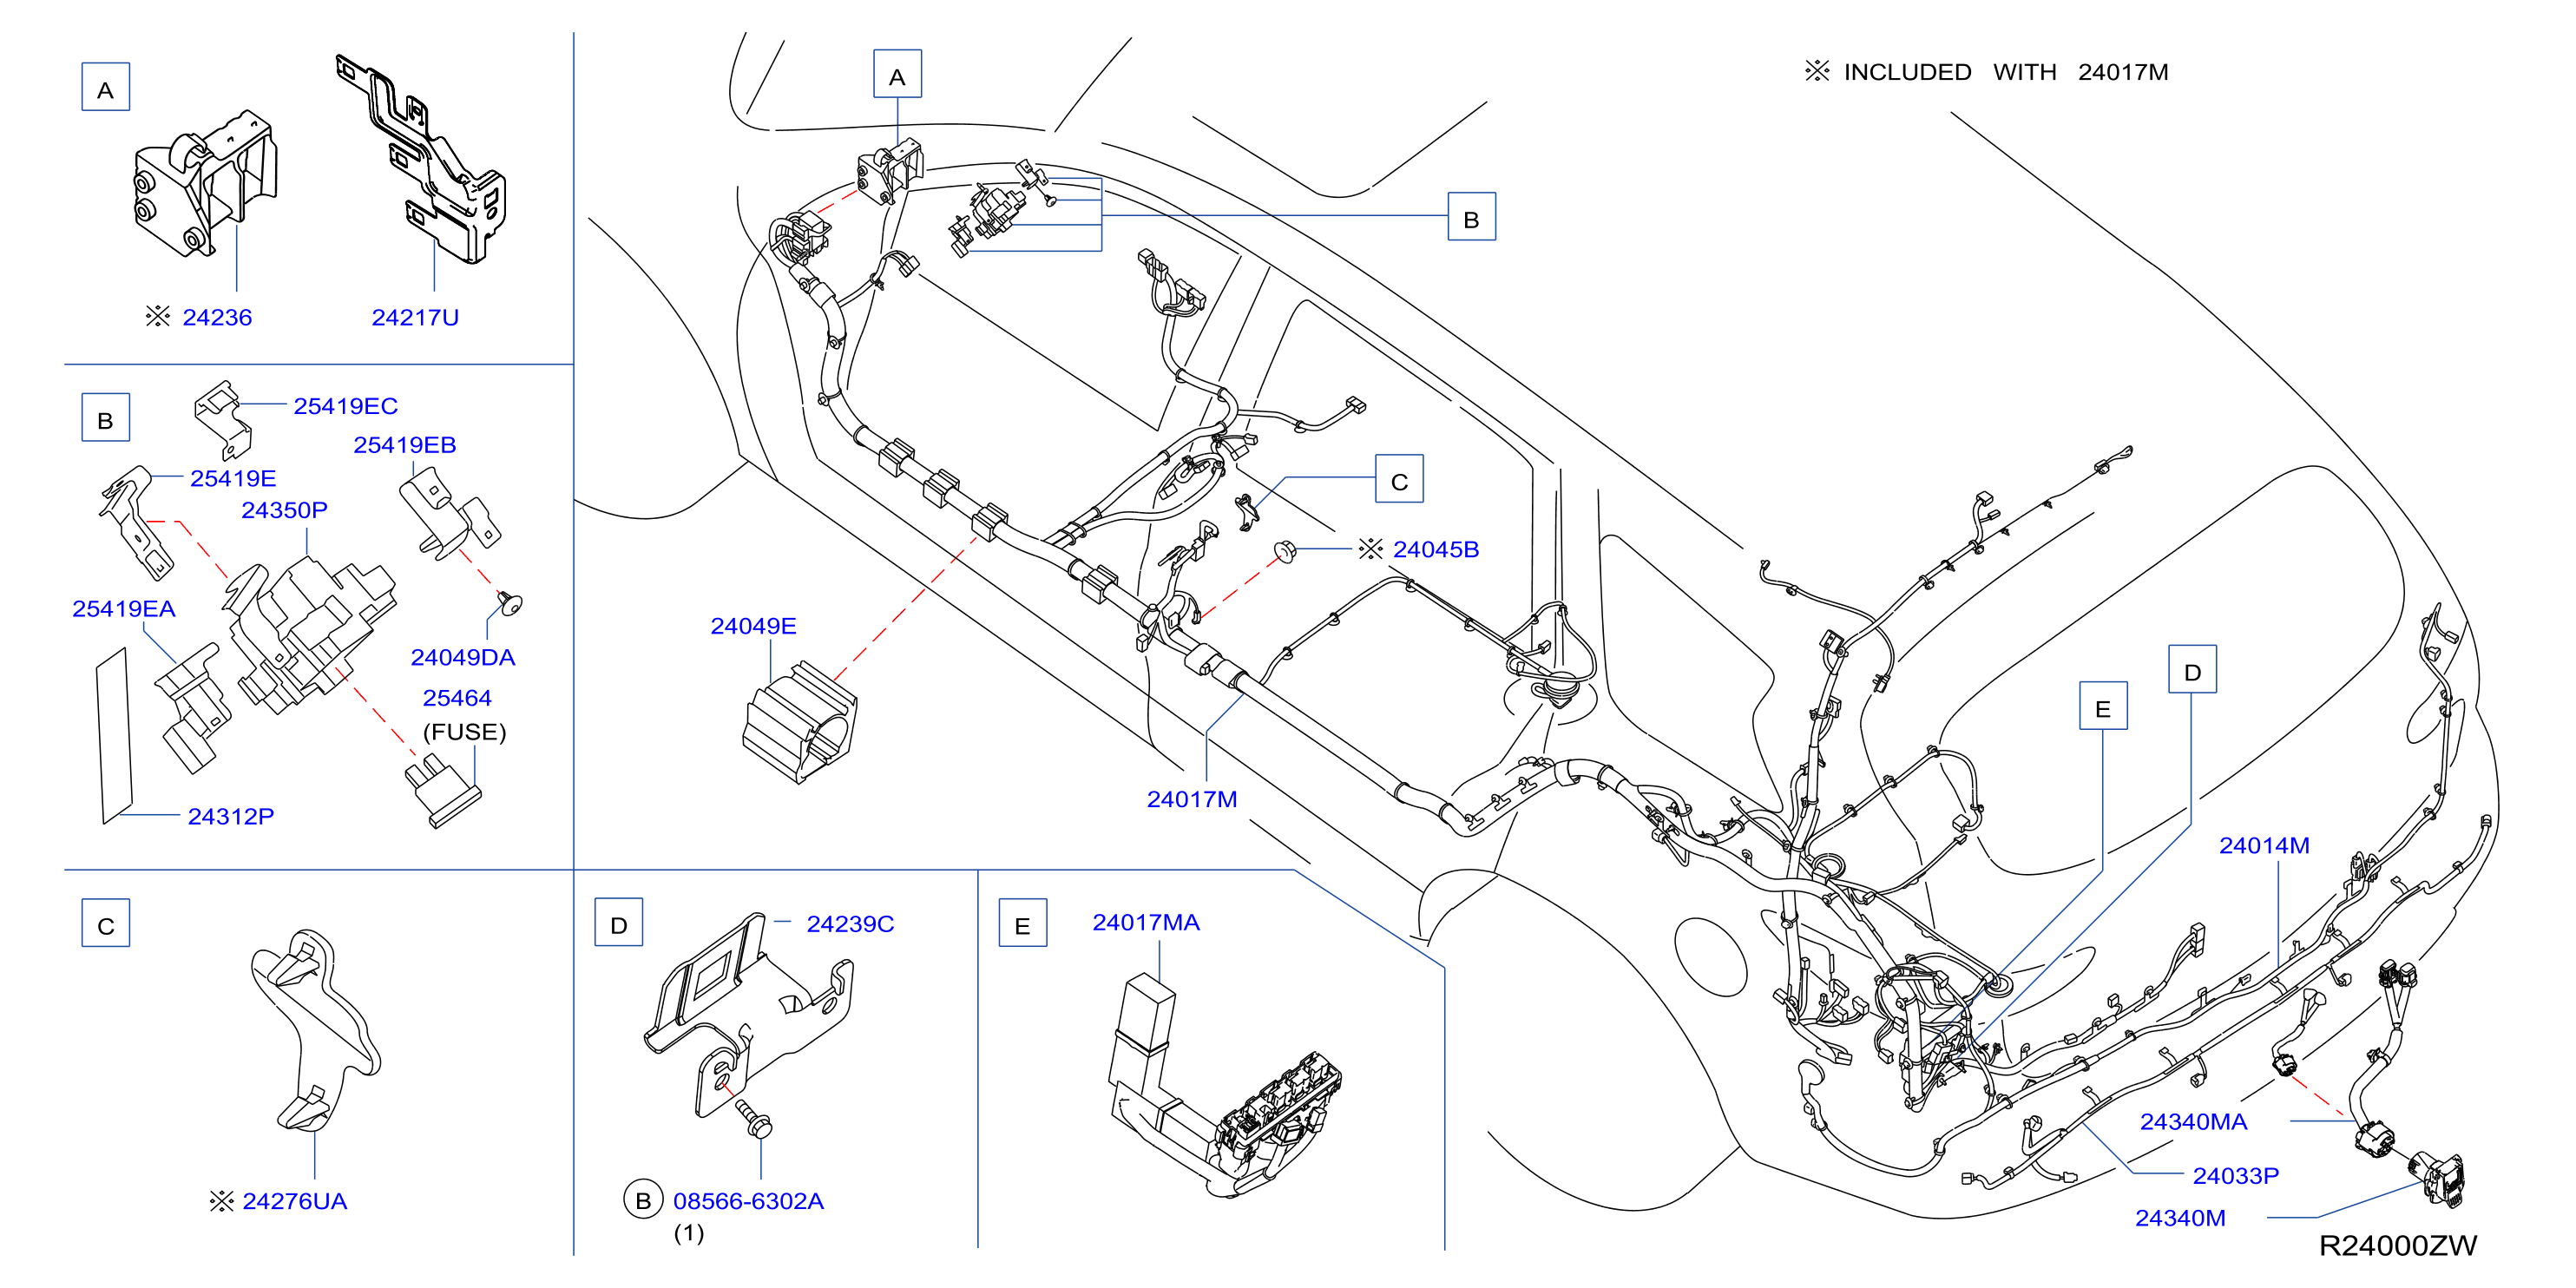 Diagram WIRING for your 2014 INFINITI Q70   